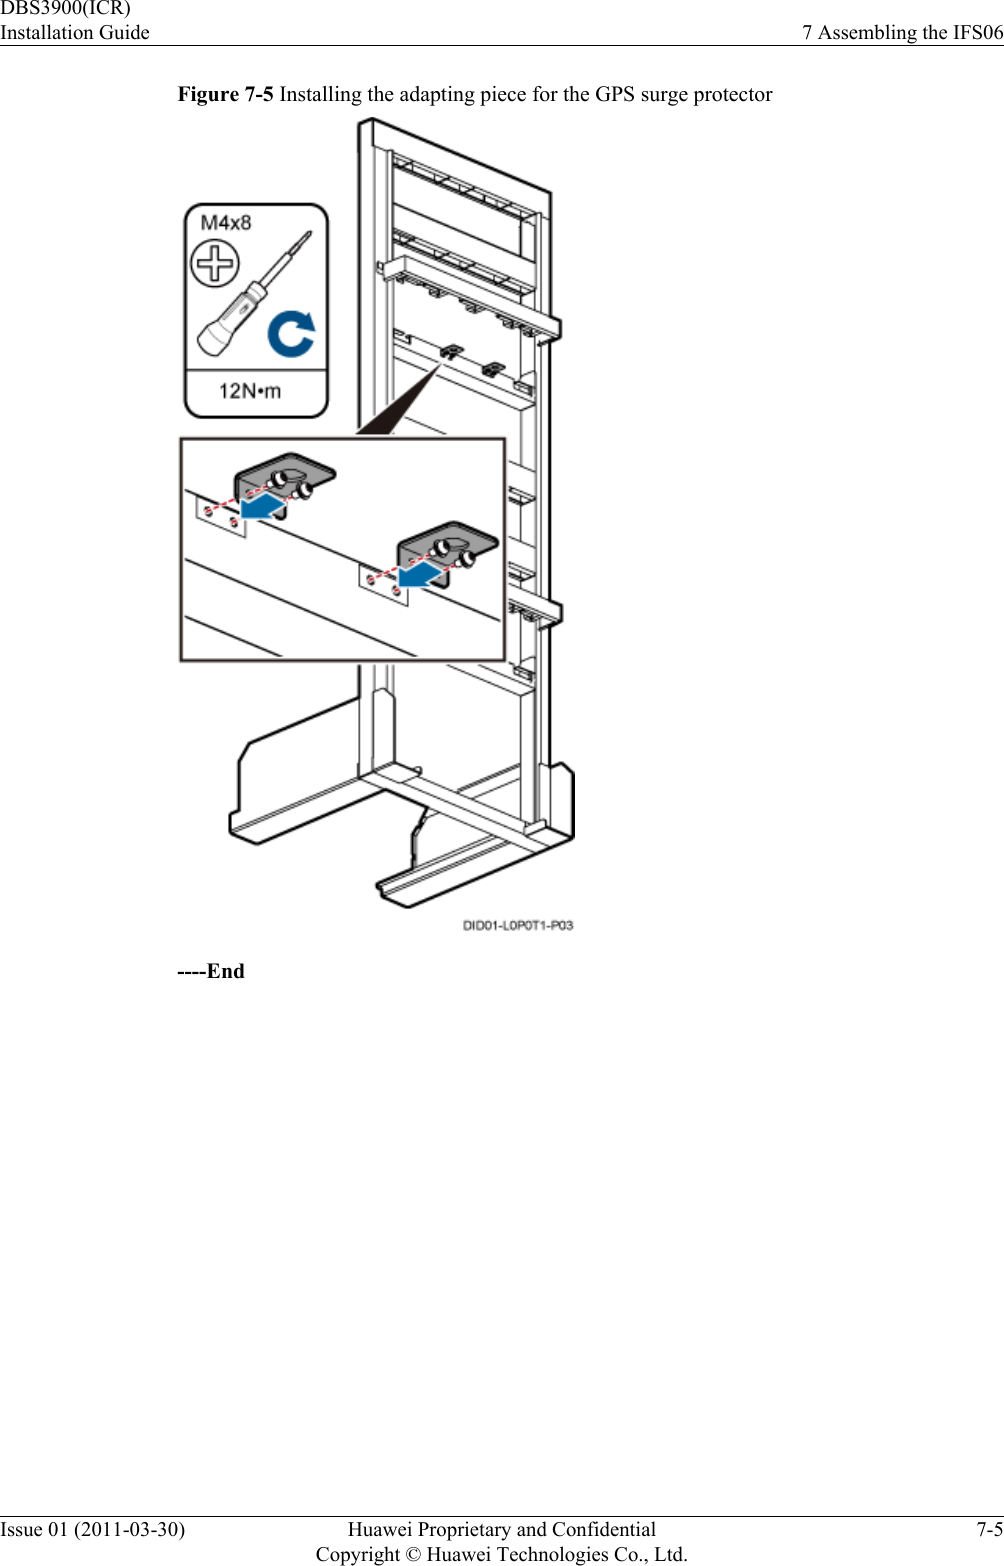 Figure 7-5 Installing the adapting piece for the GPS surge protector----EndDBS3900(ICR)Installation Guide 7 Assembling the IFS06Issue 01 (2011-03-30) Huawei Proprietary and ConfidentialCopyright © Huawei Technologies Co., Ltd.7-5